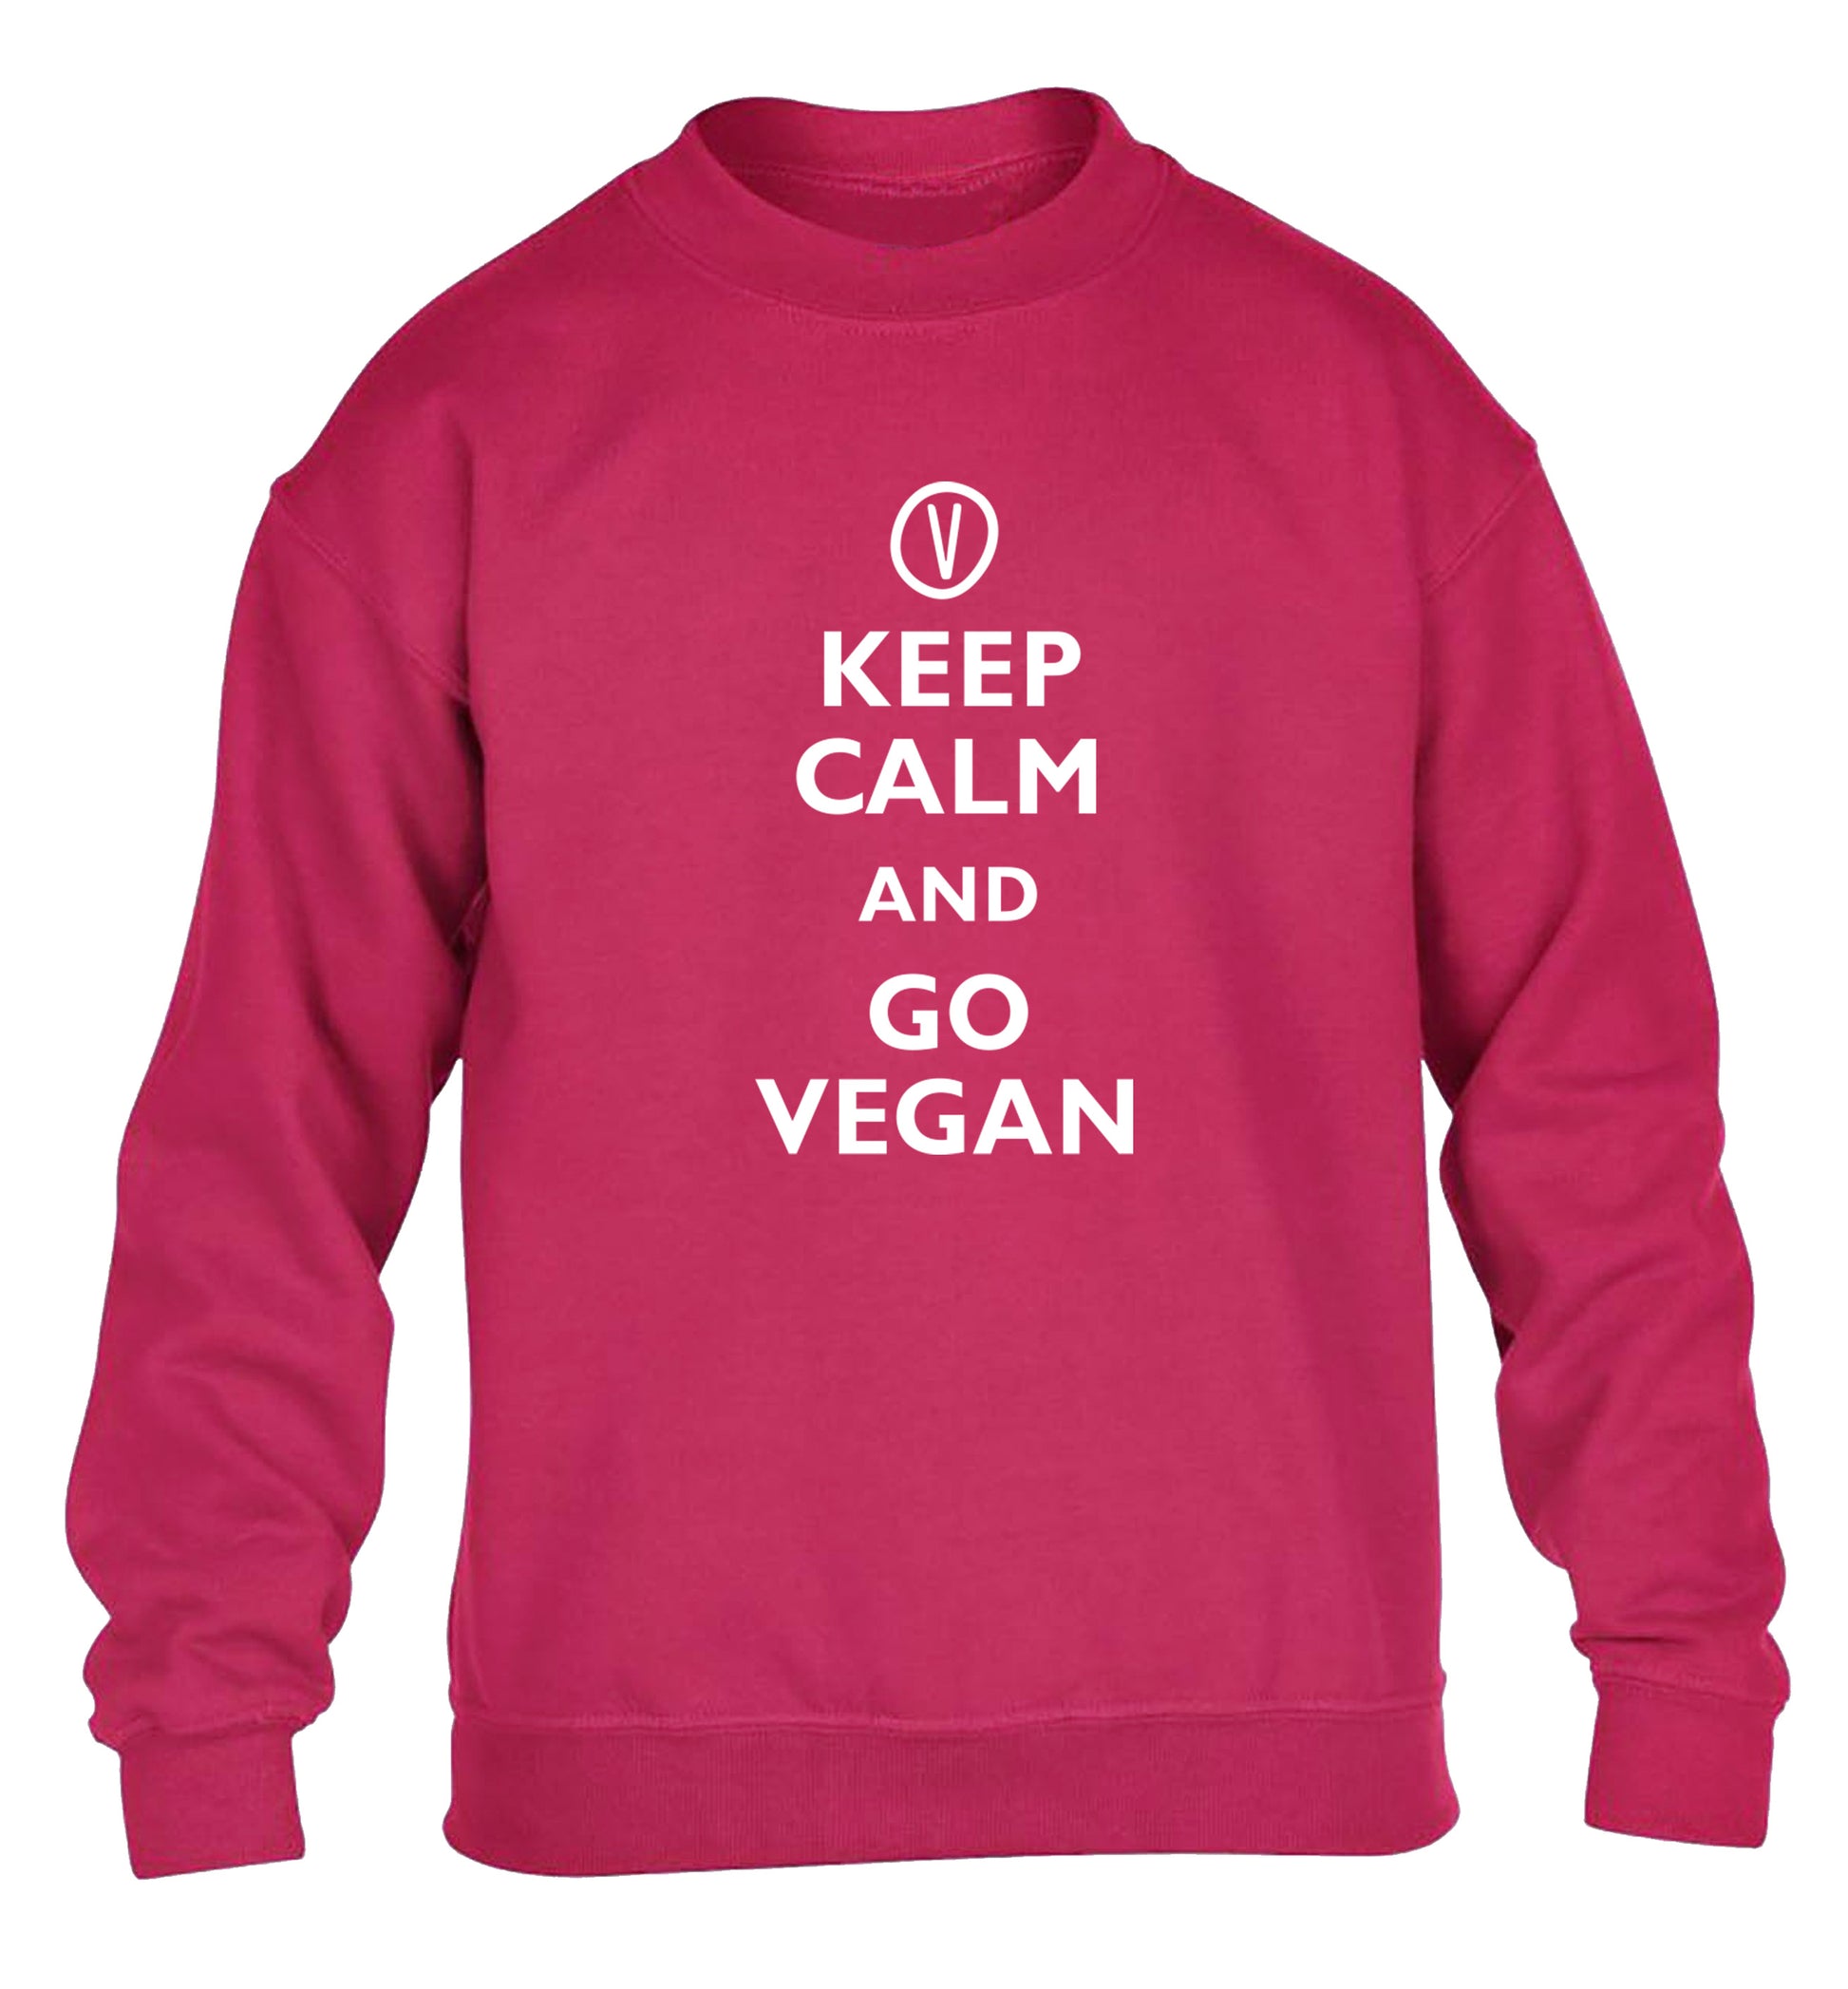 Keep calm and go vegan children's pink sweater 12-13 Years